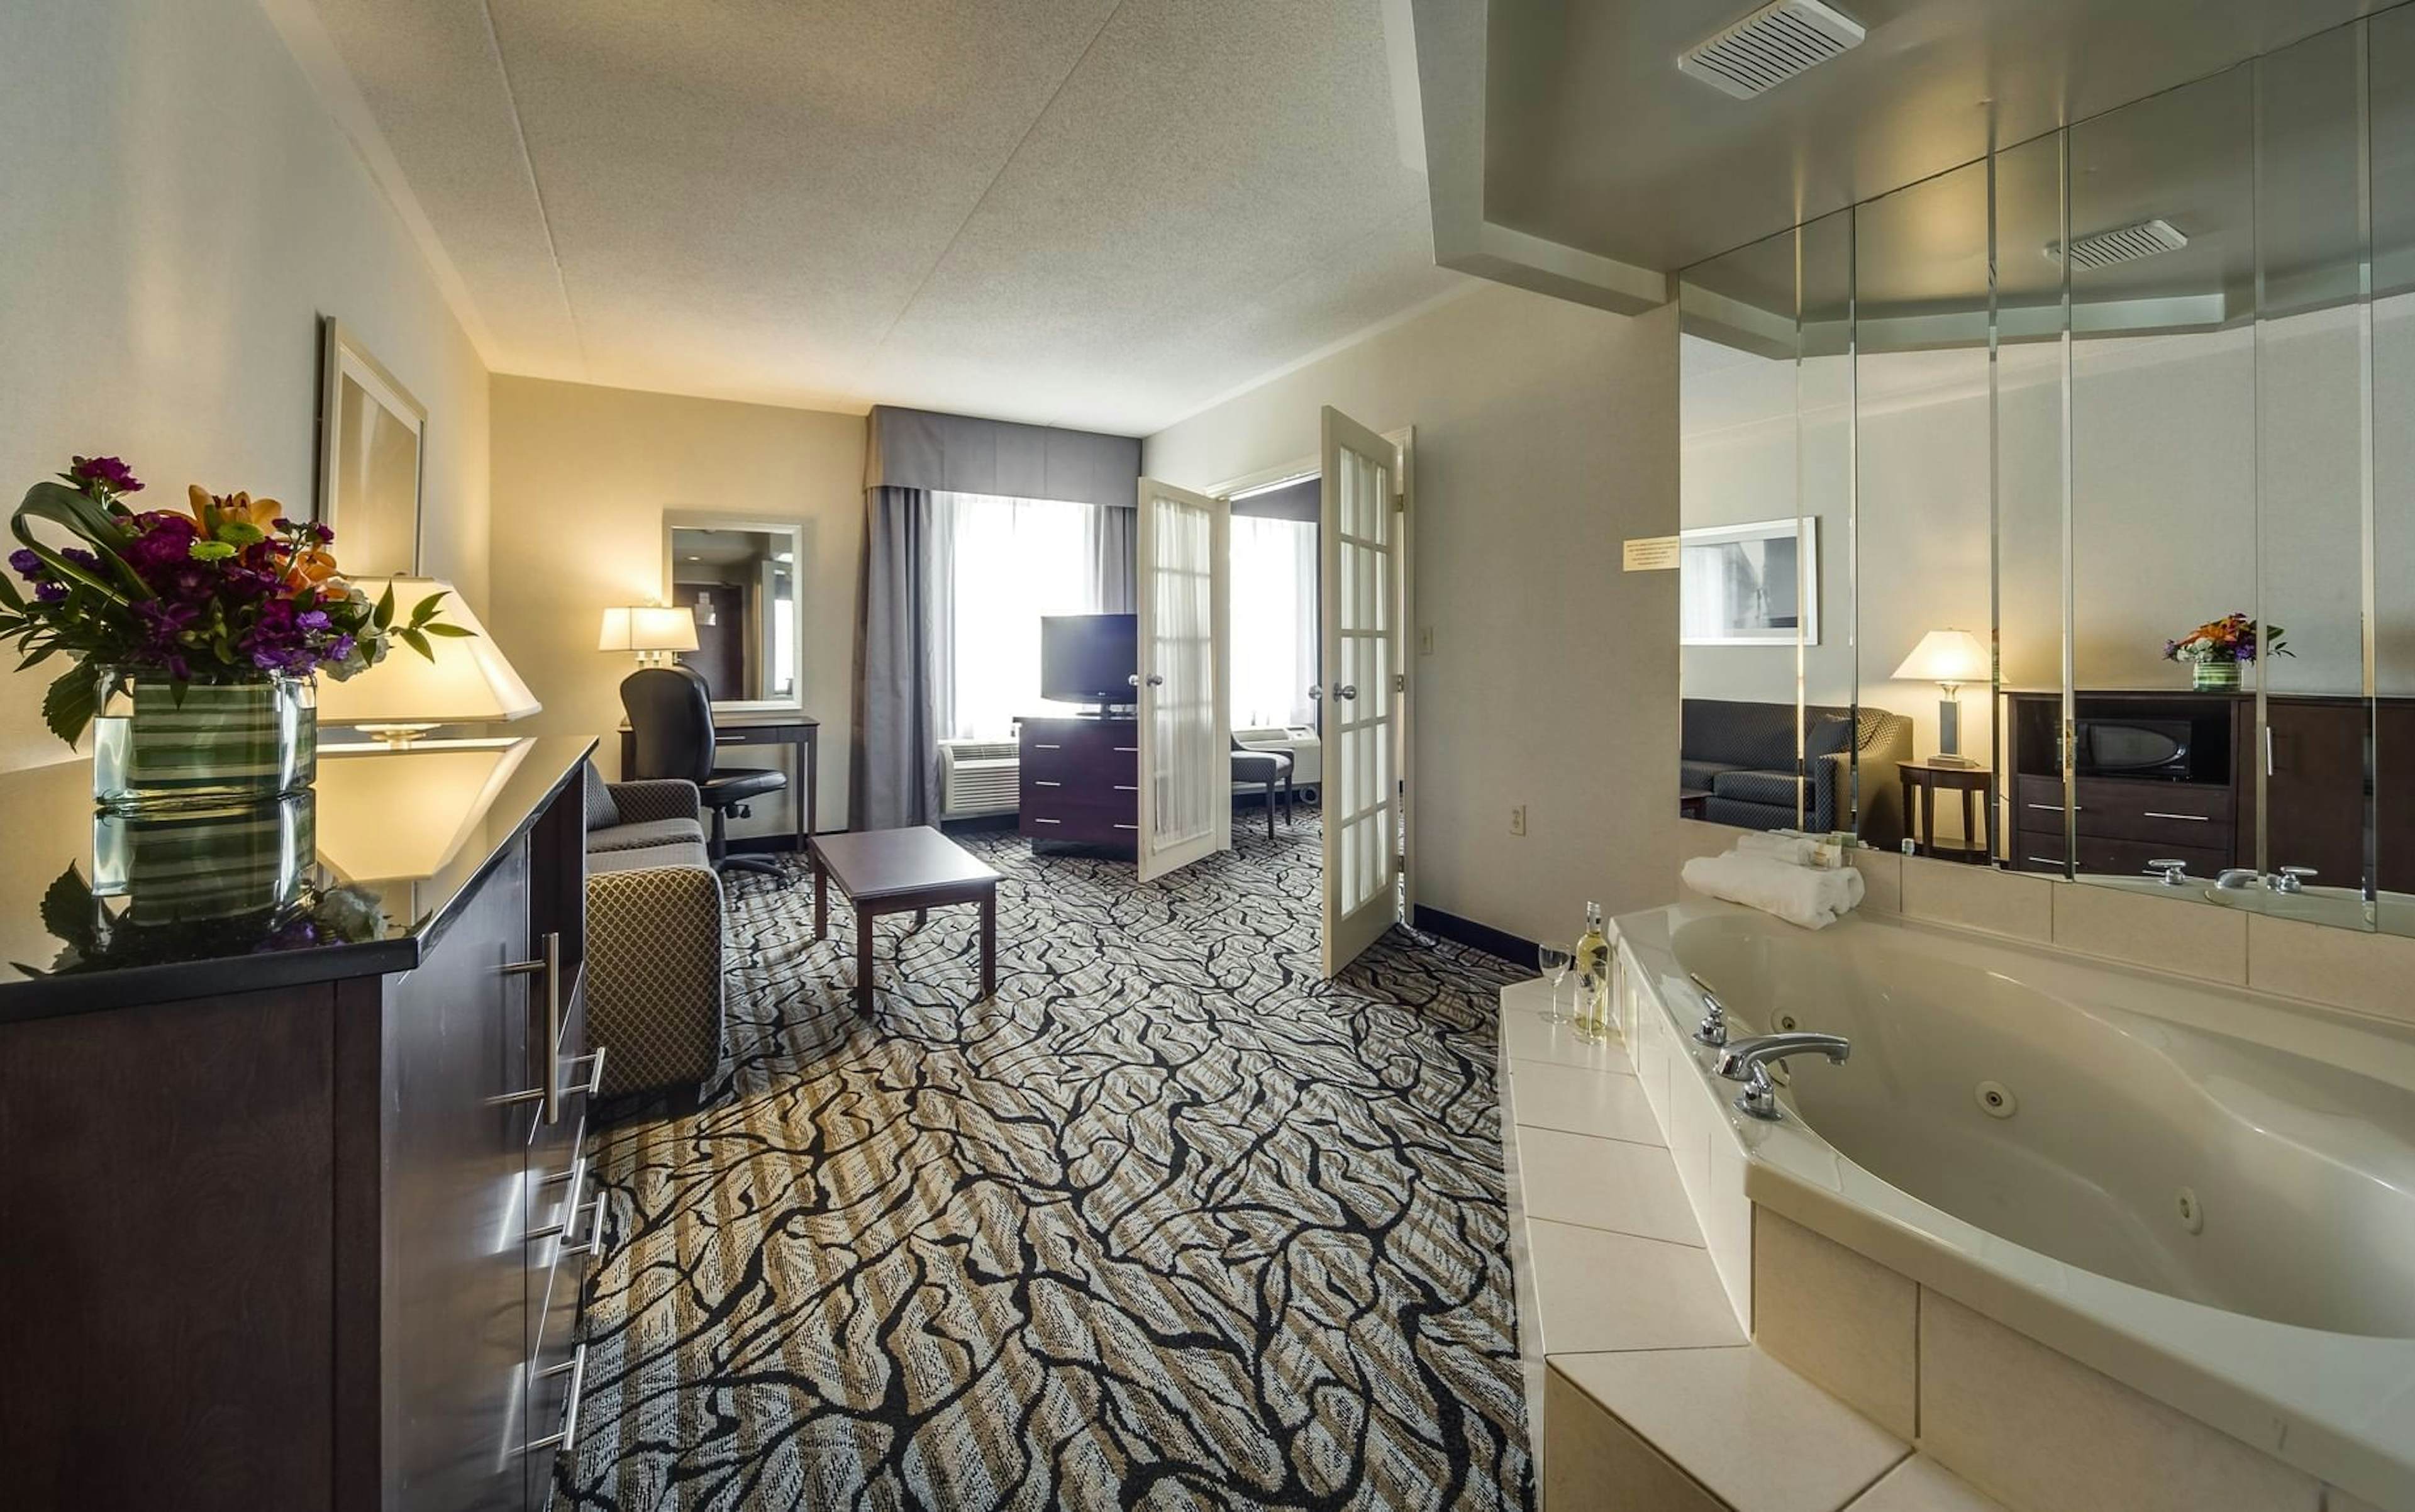 Monte Carlo Inns  Oak - The Mississauga Suite image 1